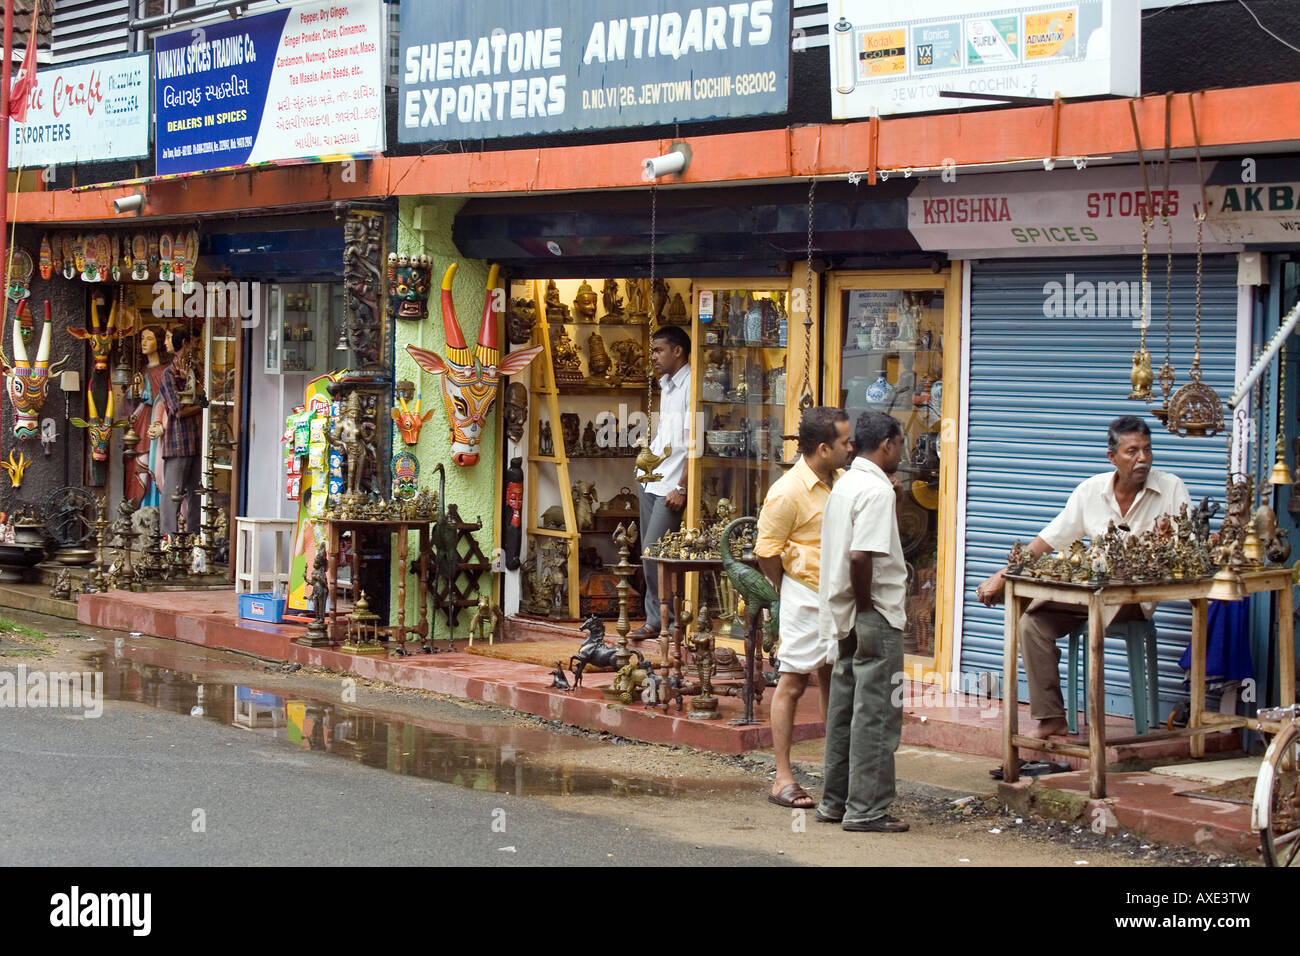 Small shops selling Indian antiques and reproductions lining 'Jew Street' in 'Jew Town' Mattancherry Kochi Cochin Kerala South I Stock Photo